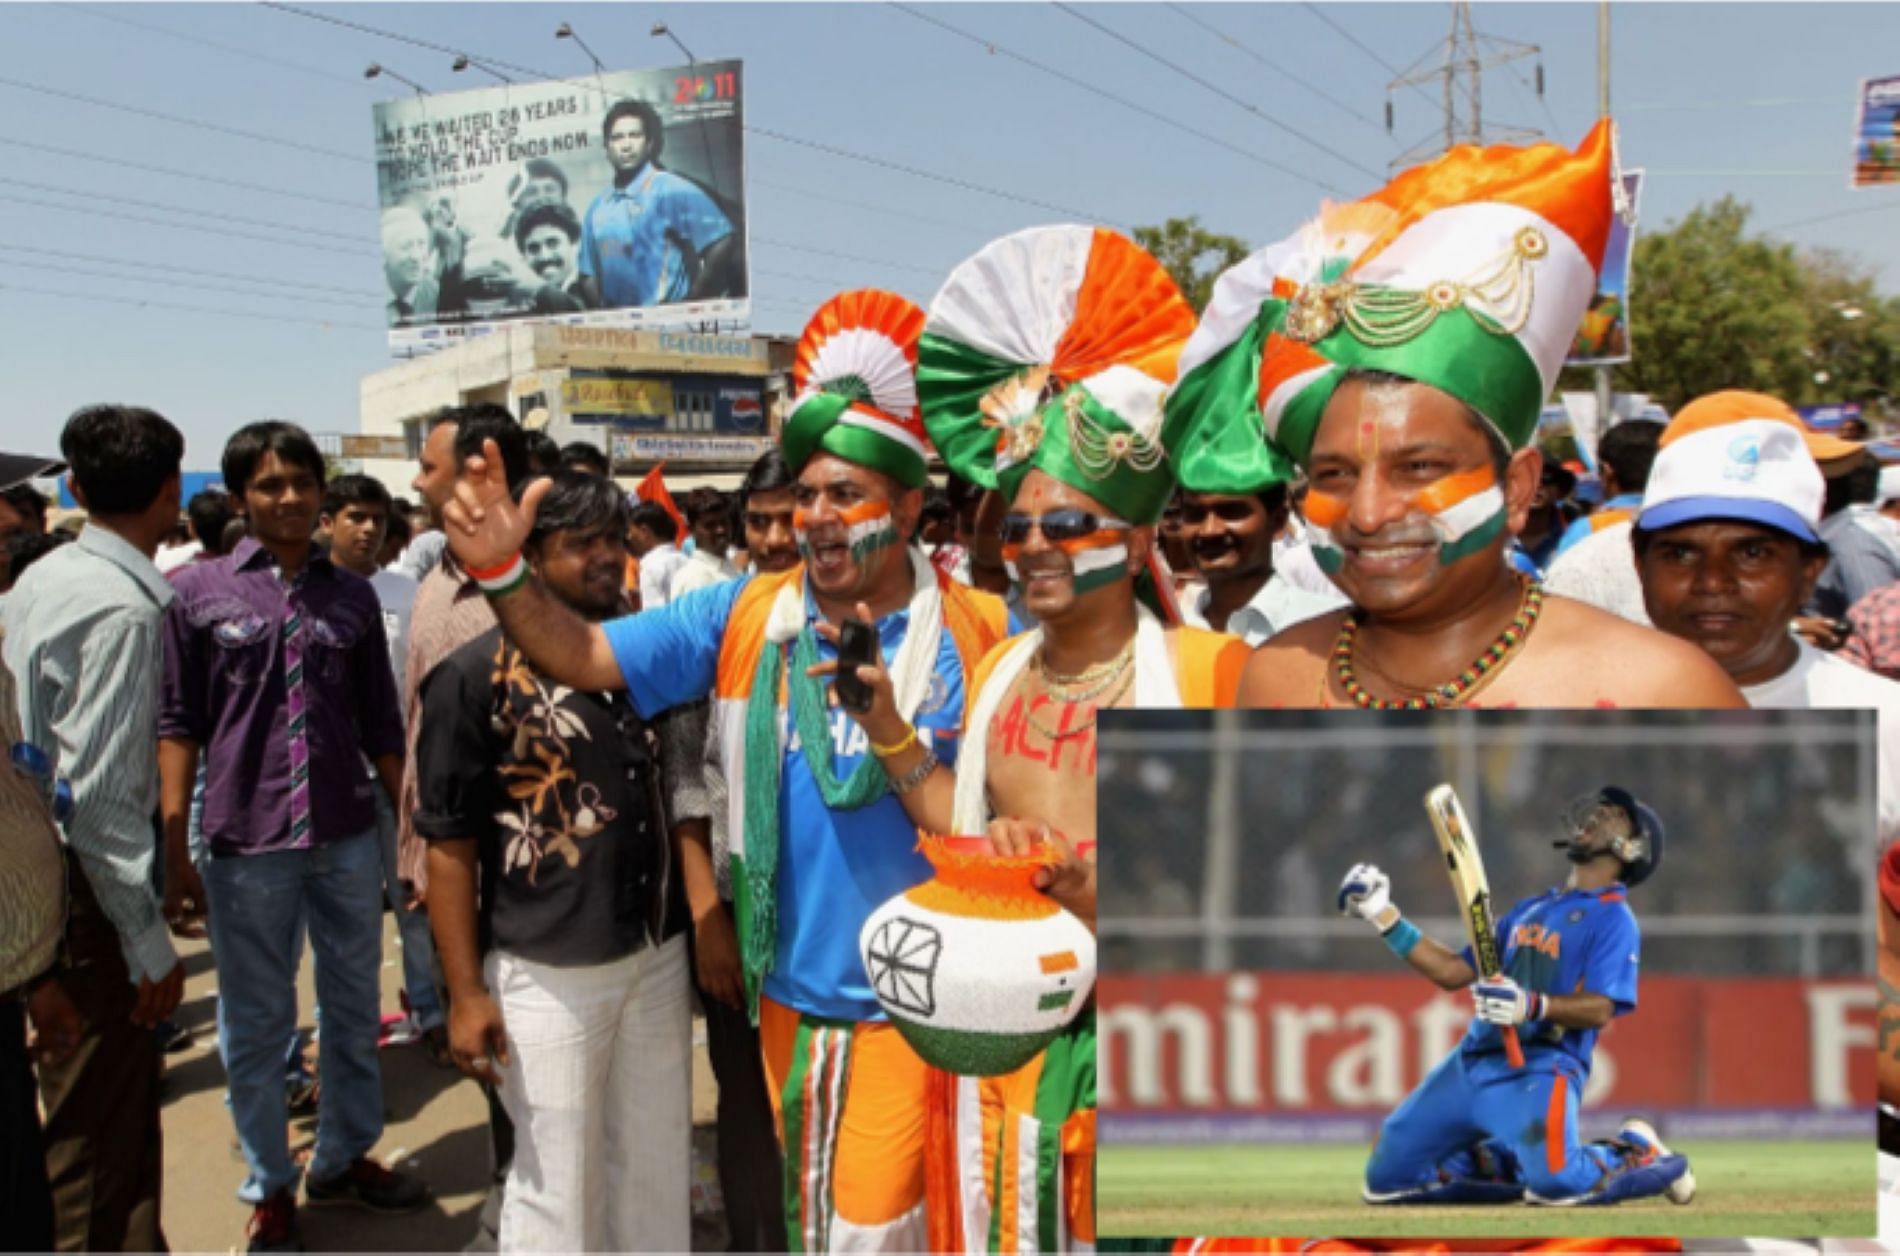 Indian fans celebrated their famous win over Australia at Ahmedabad